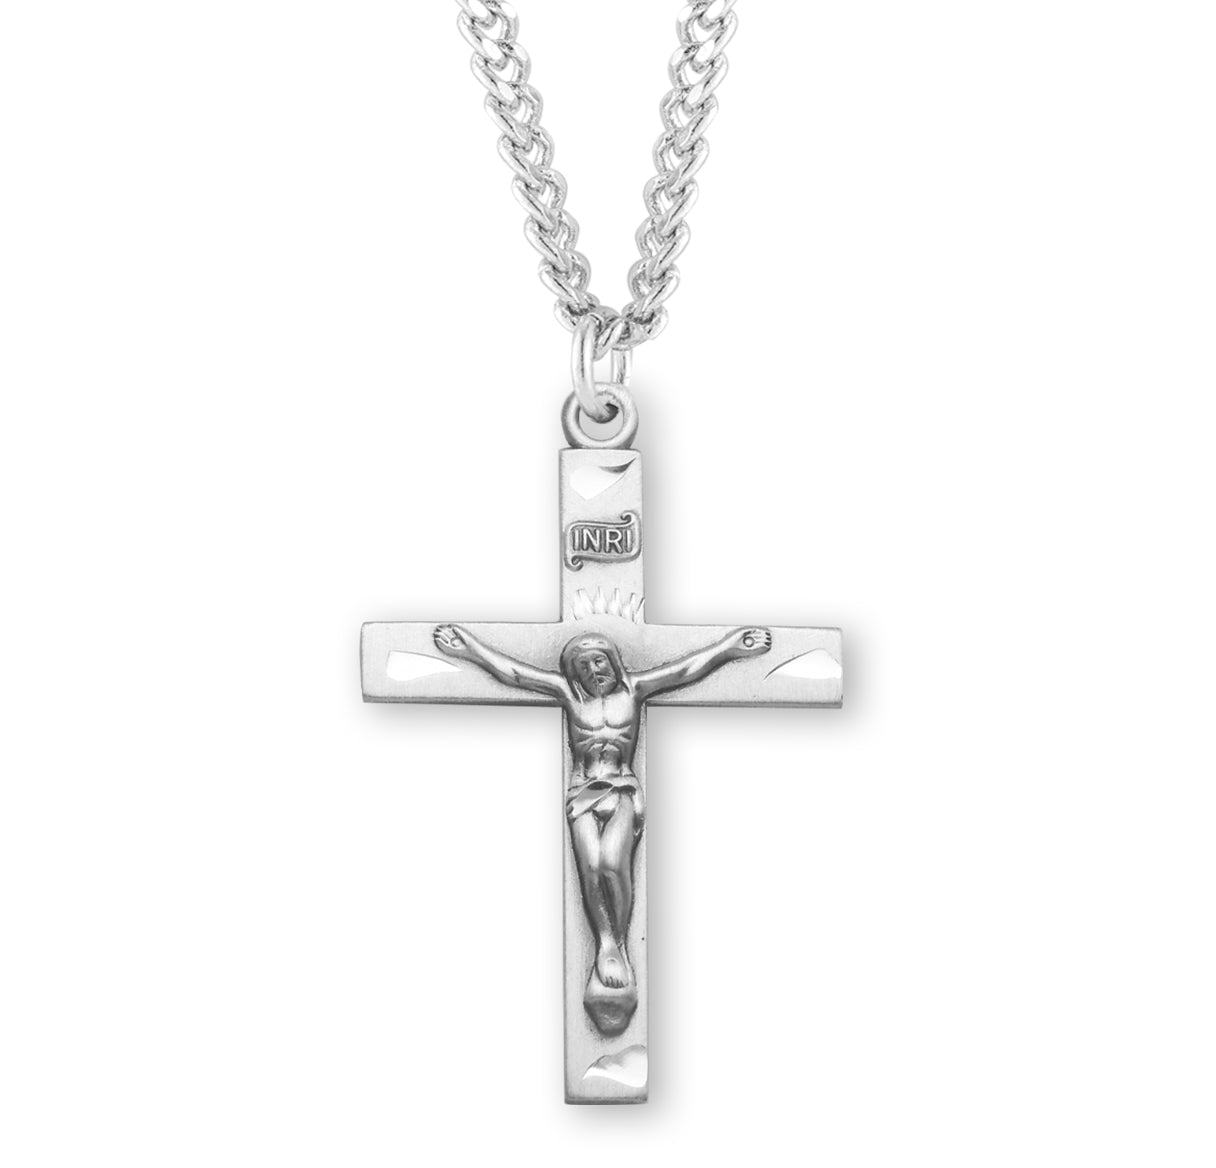 Basic Engraved Sterling Silver Crucifix